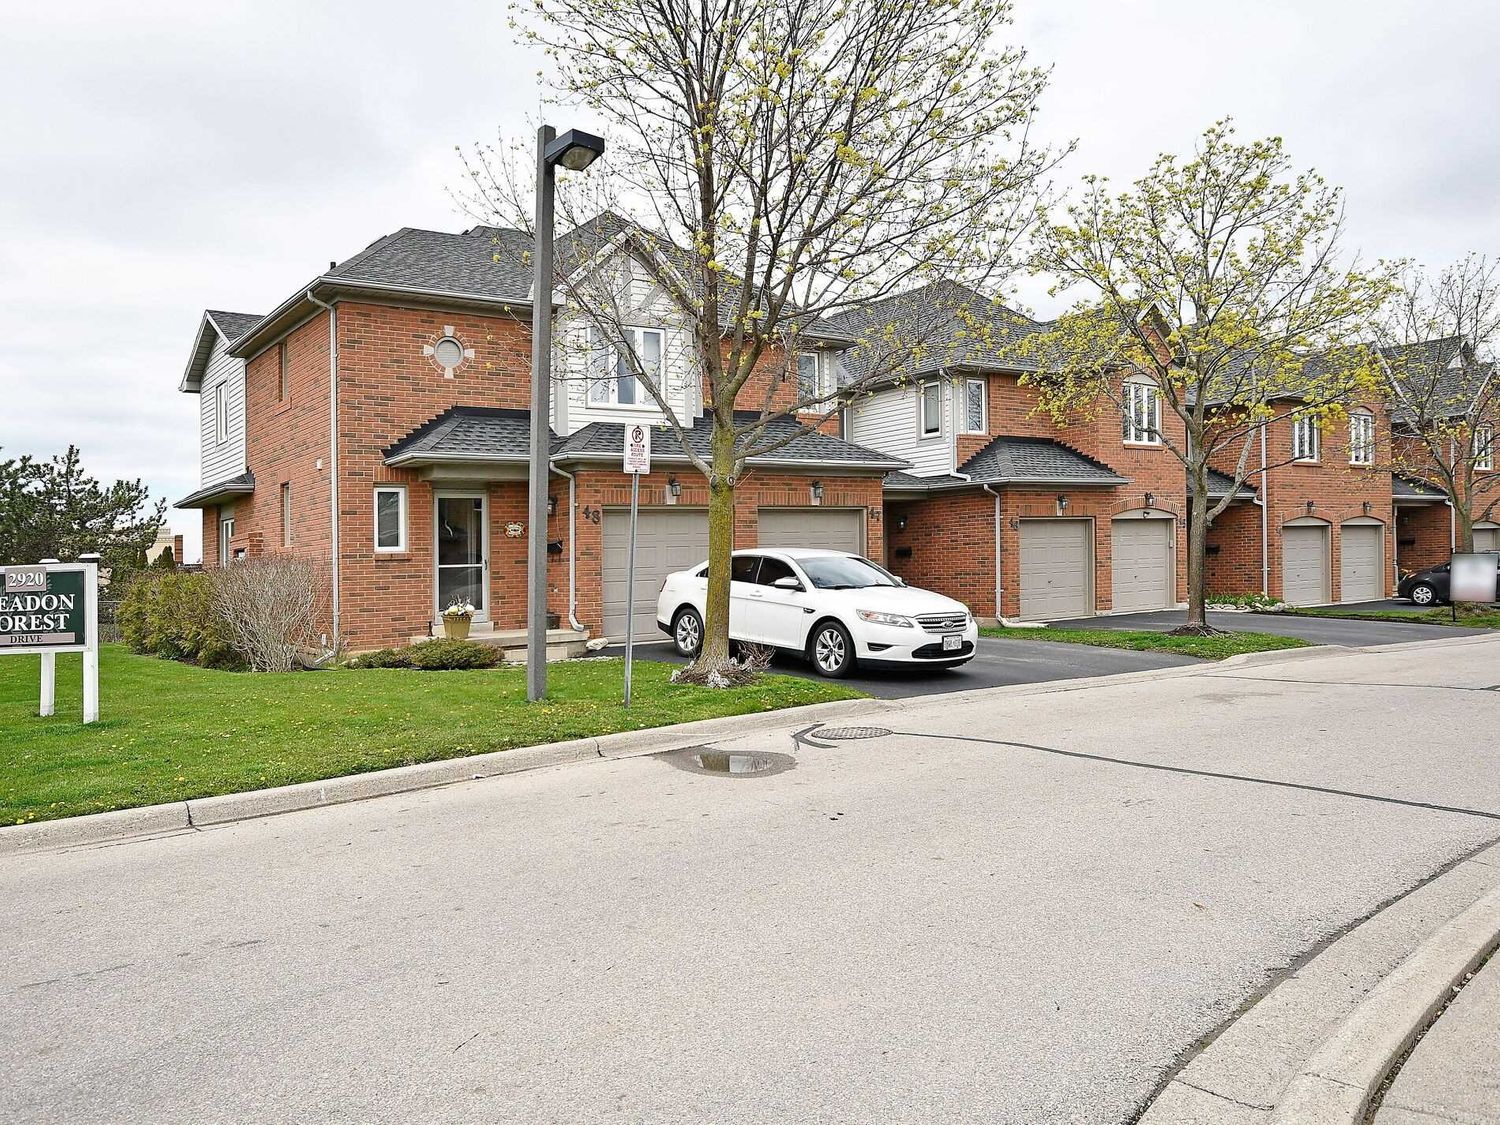 2920 Headon Forest Drive. 2920 Headon Forest Drive Townhomes is located in  Burlington, Toronto - image #1 of 2